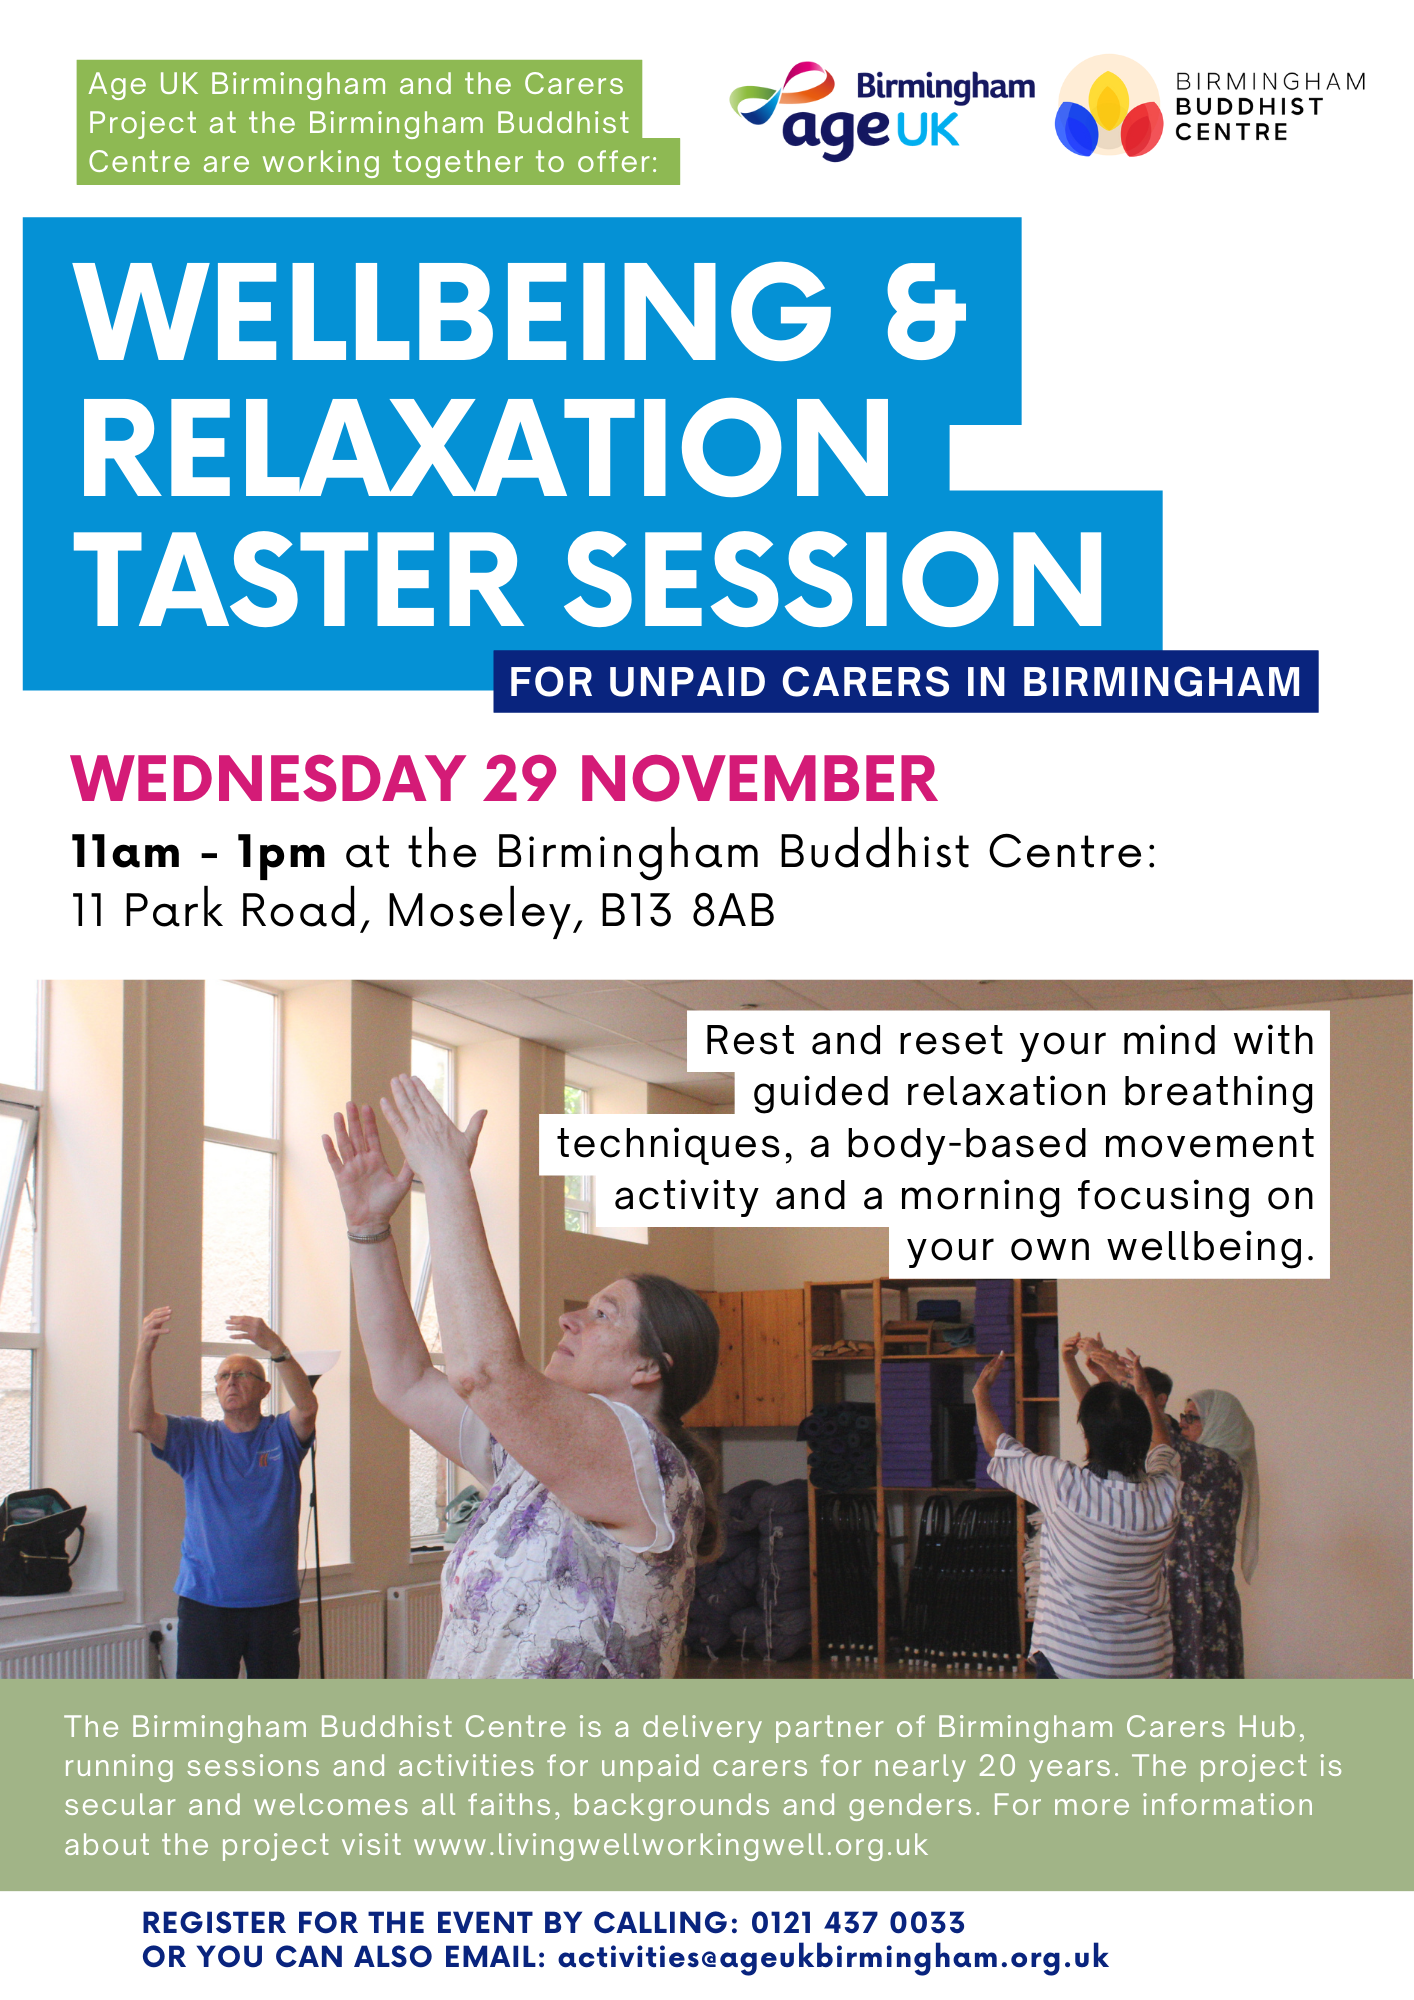 Information about the taster session